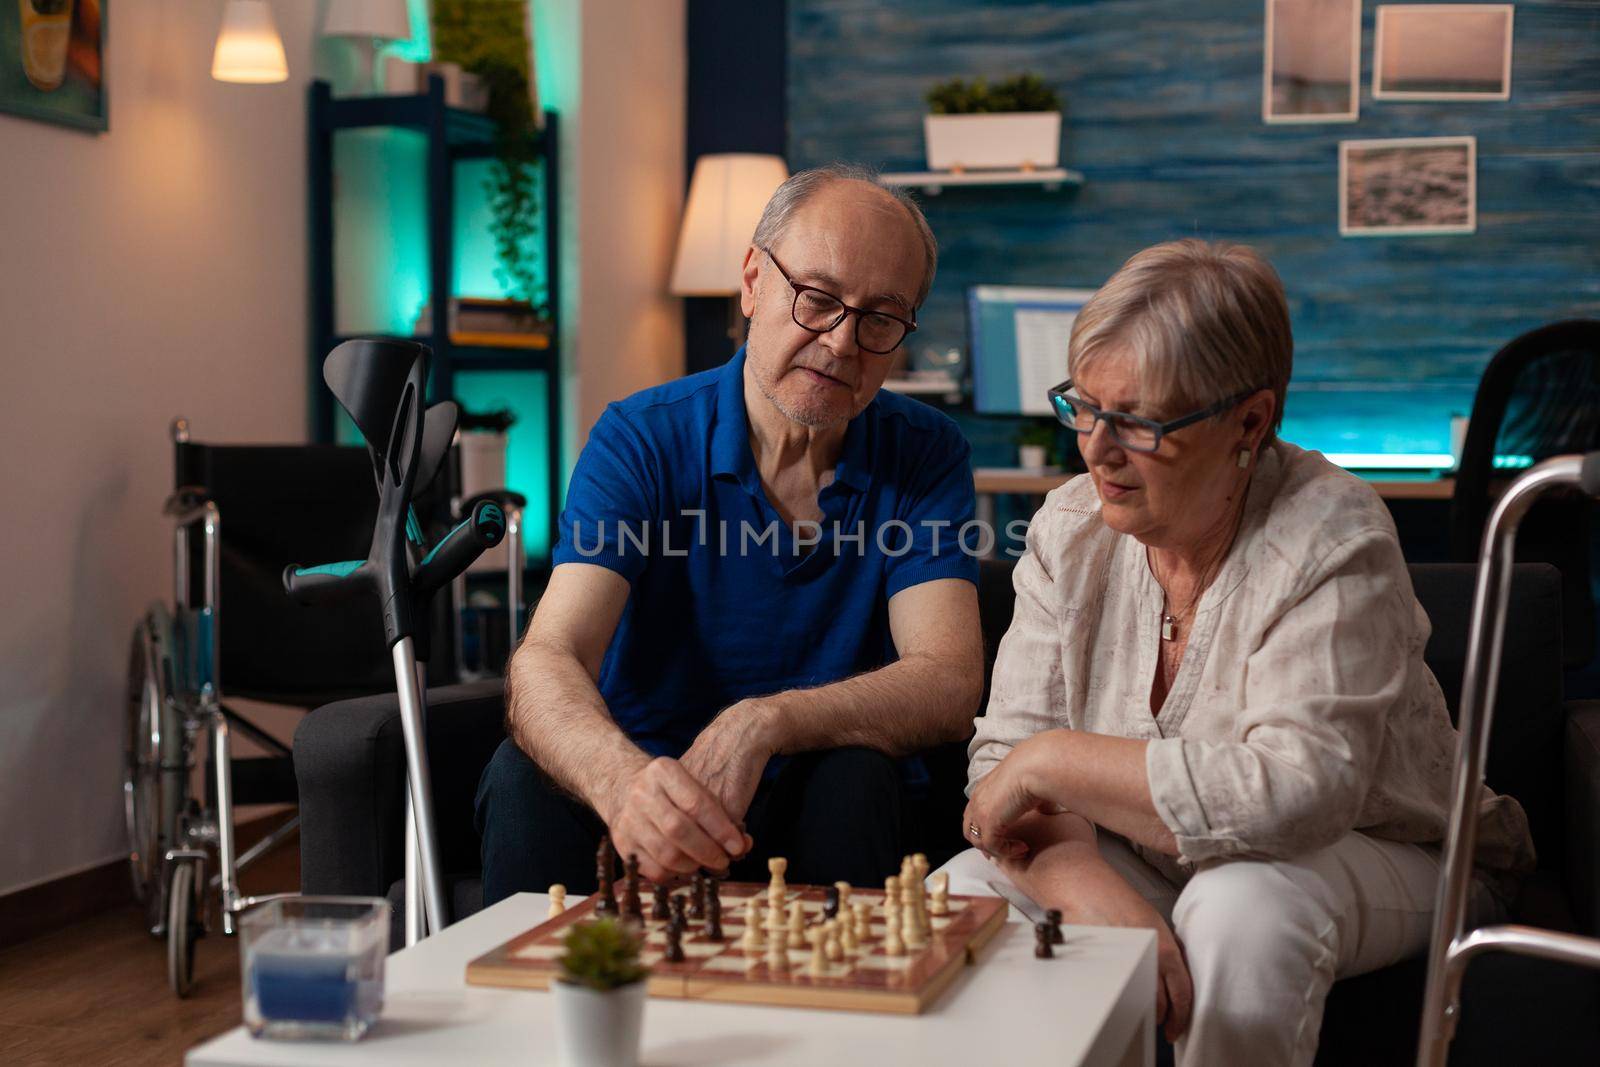 Senior people enjoying retirement with chess game by DCStudio